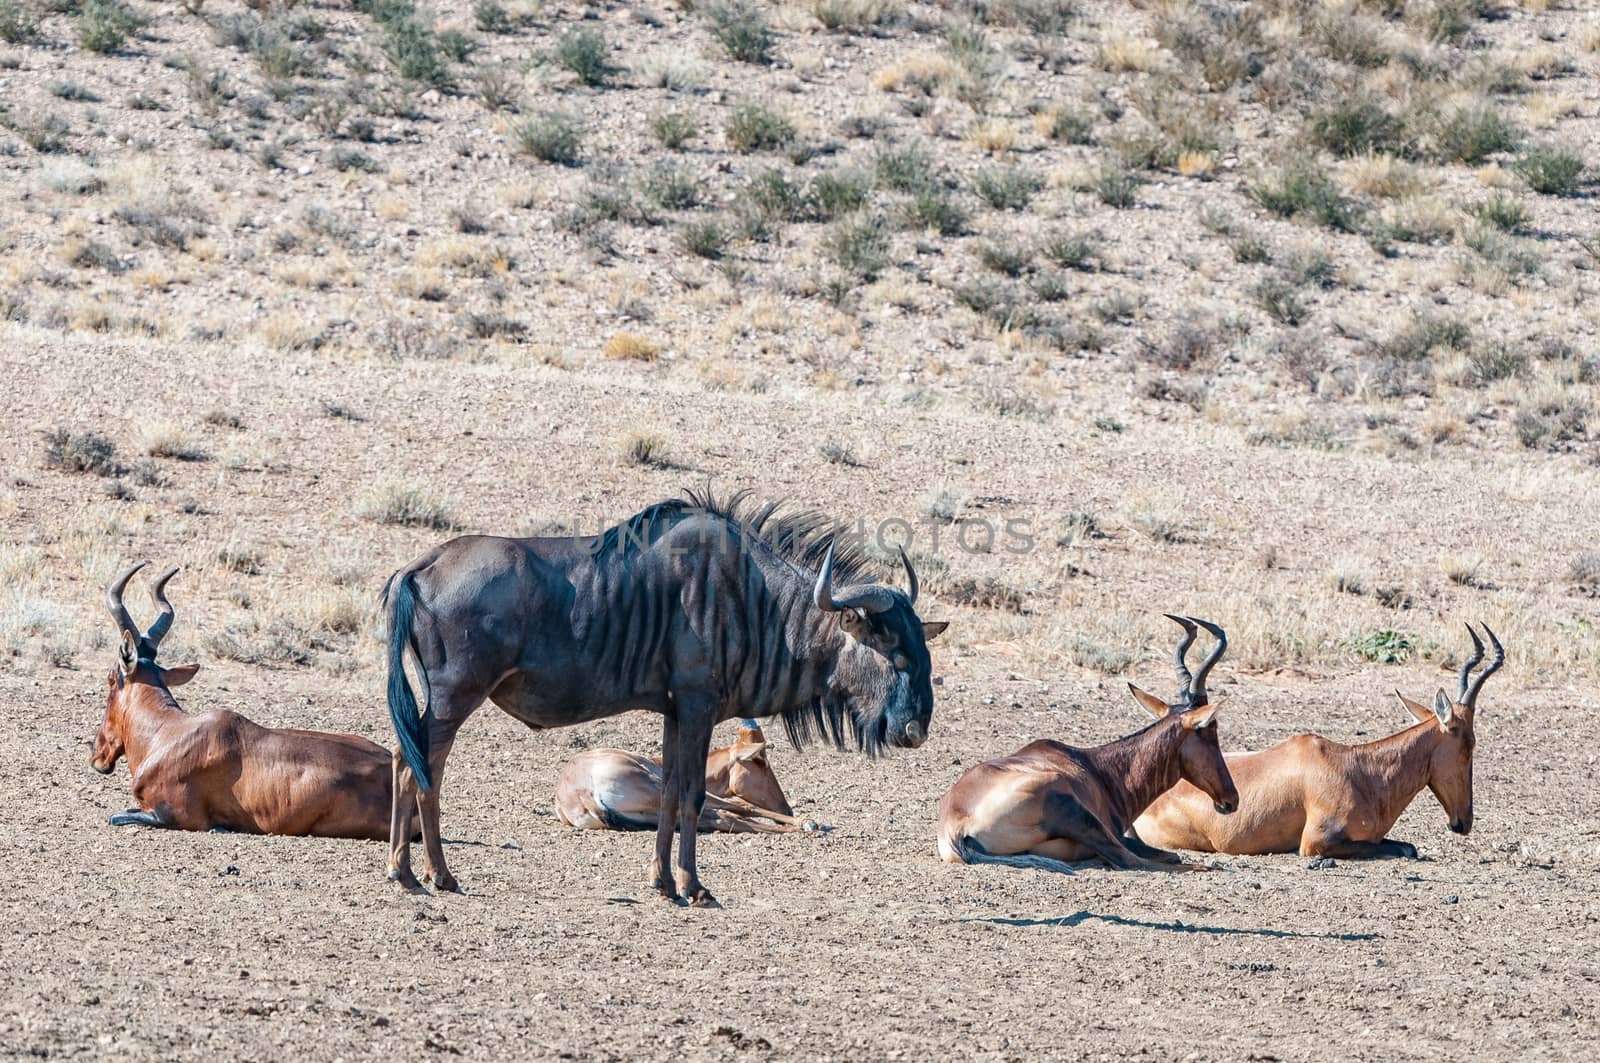 A blue wildebeest and red hartebeest in the Kgalagadi